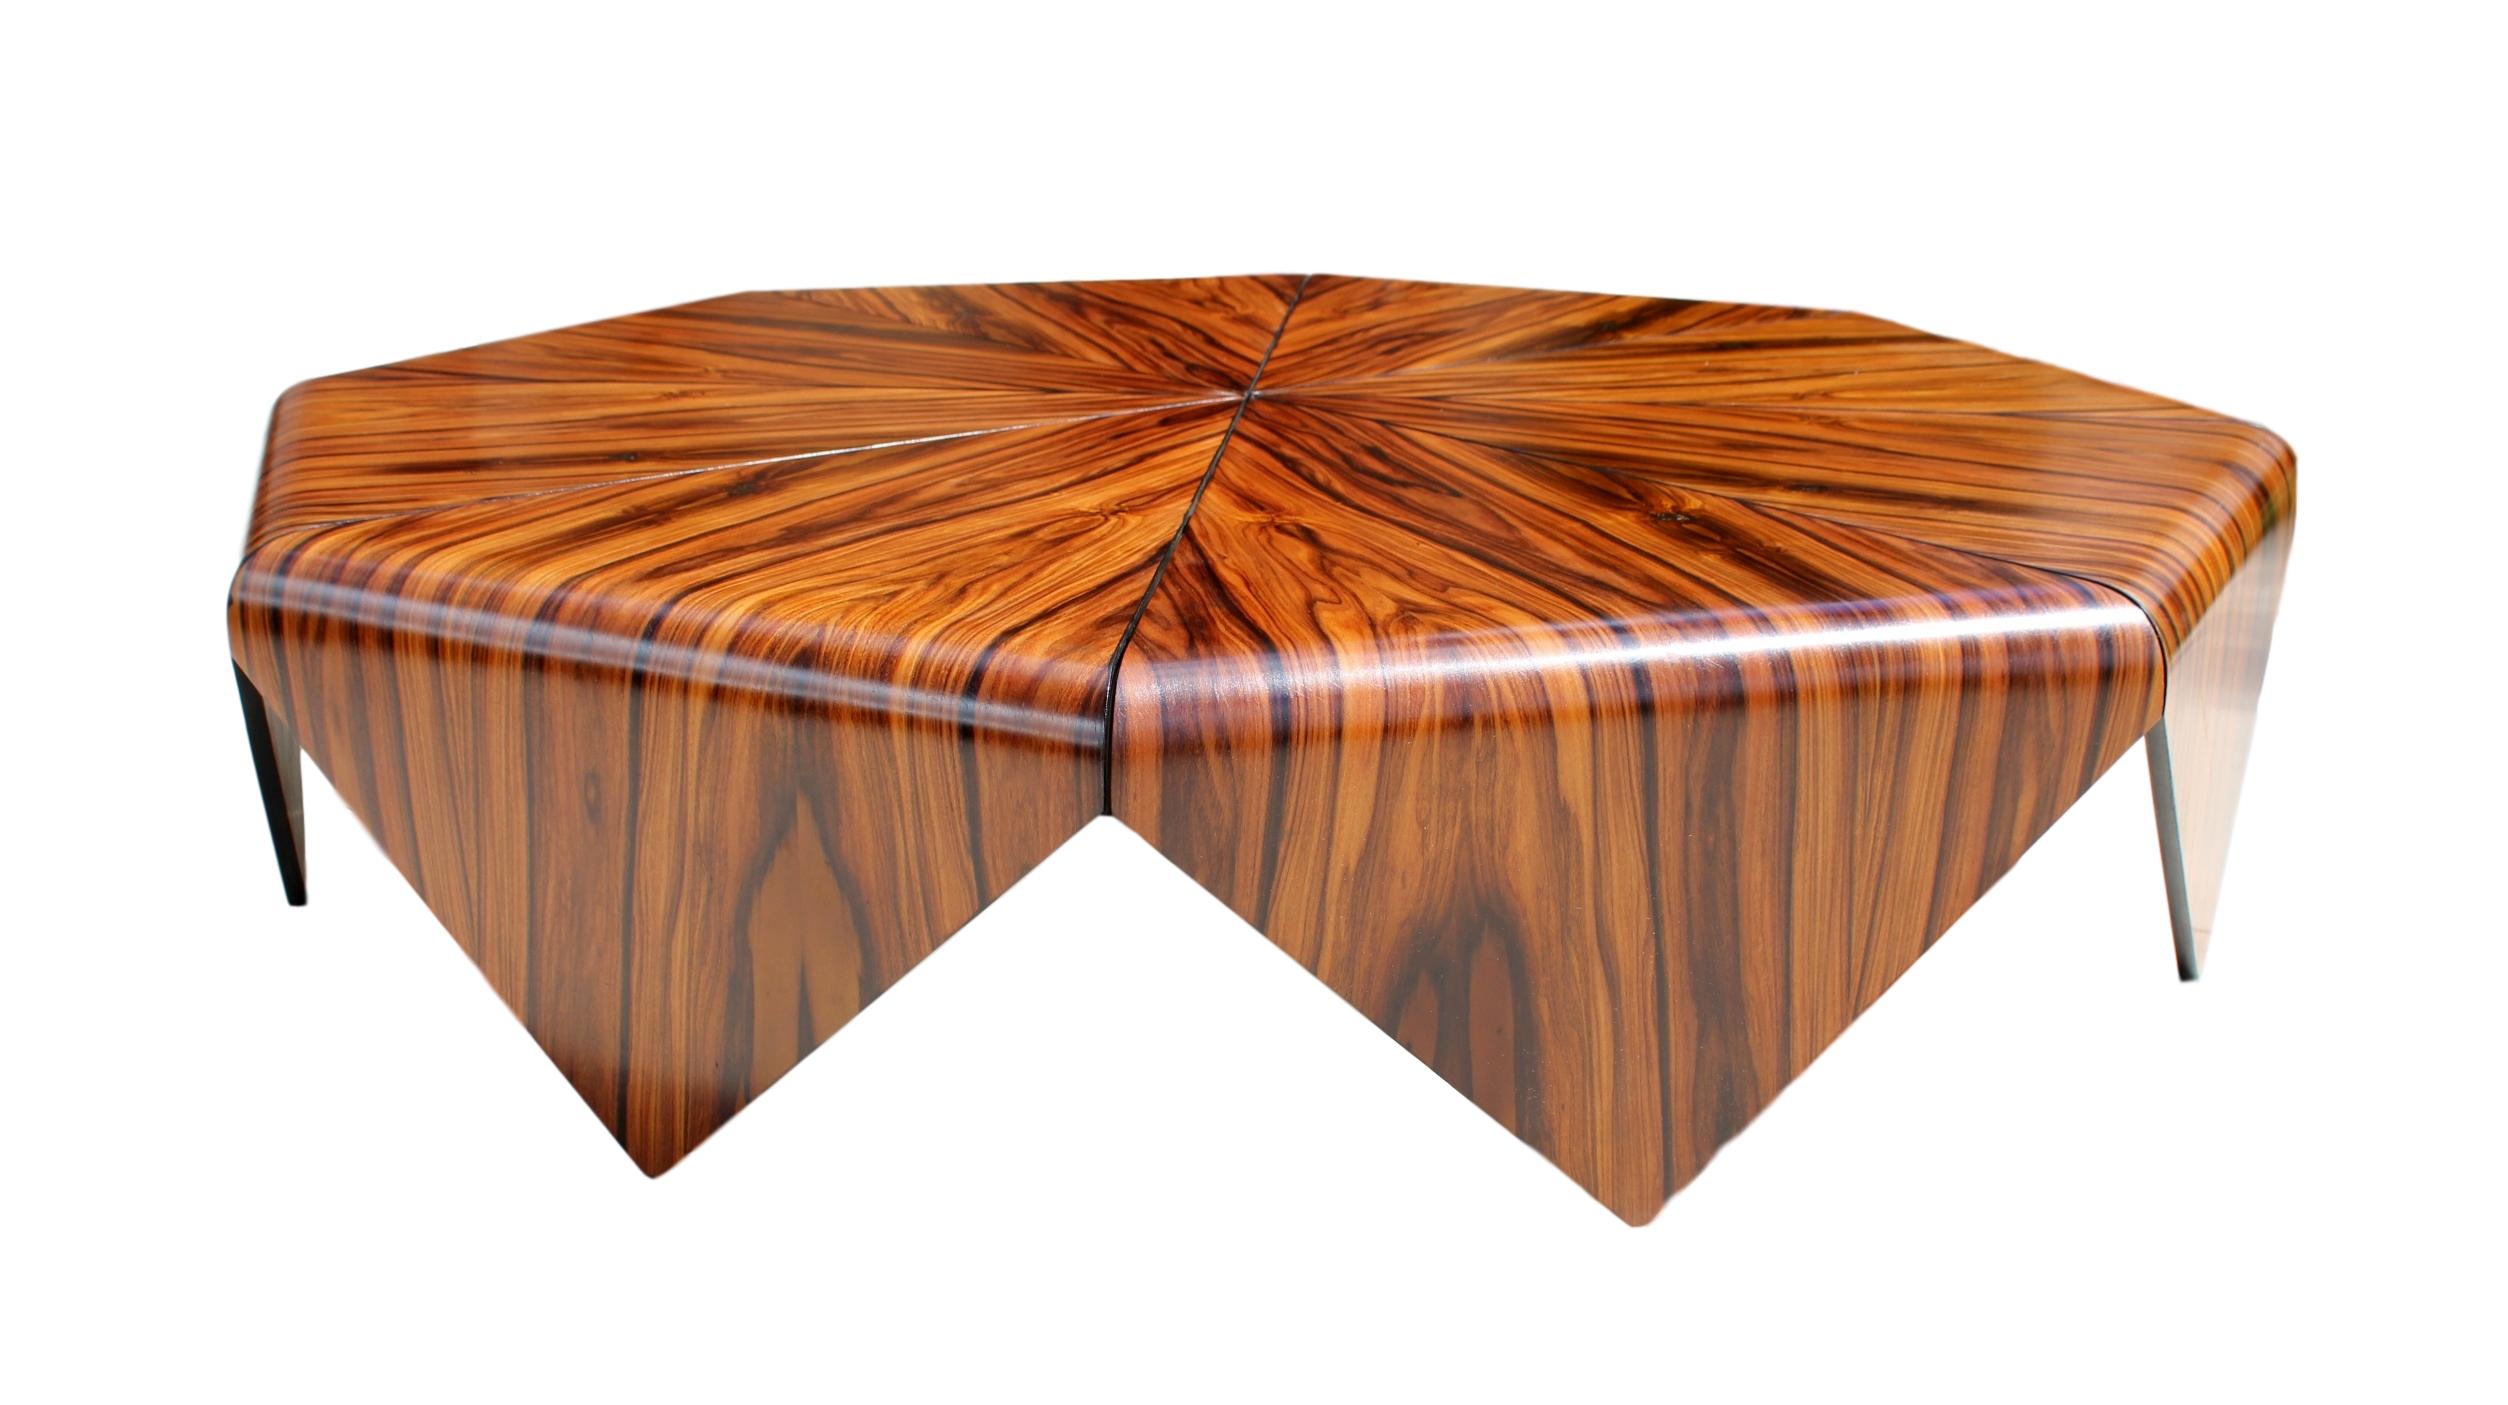 The 'Pétalas' coffee table is a design by Jorge Zalszupin, inspired by a folded paper structure of origami and is a masterpiece from Zalszupin! The rosewood coffee table consists of 8 diamond-shaped leaves, which are folded on an iron structure.